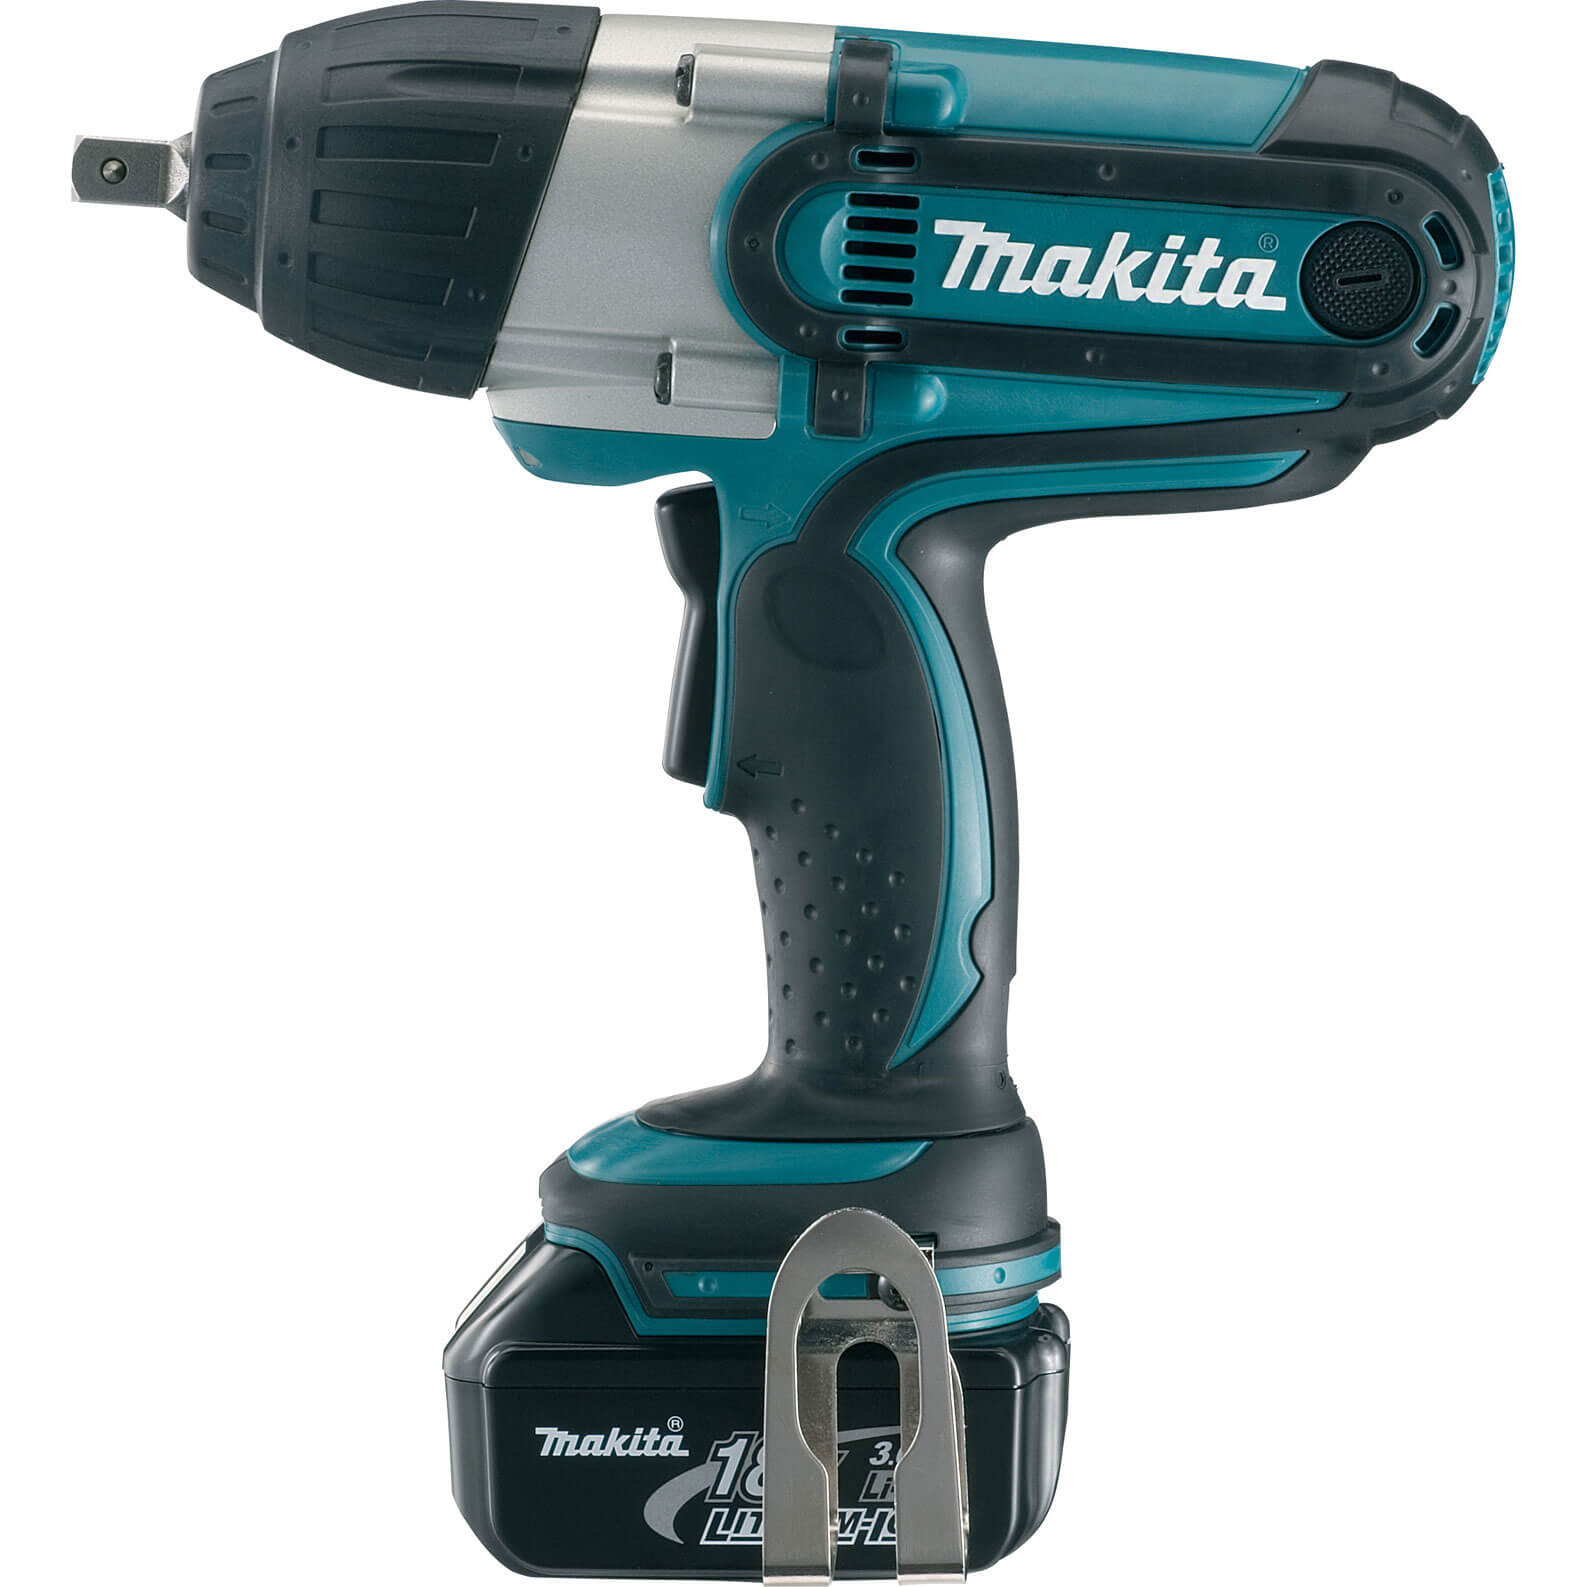 Image of Makita DTW450 18v LXT Cordless 1/2" Drive Impact Wrench No Batteries No Charger No Case